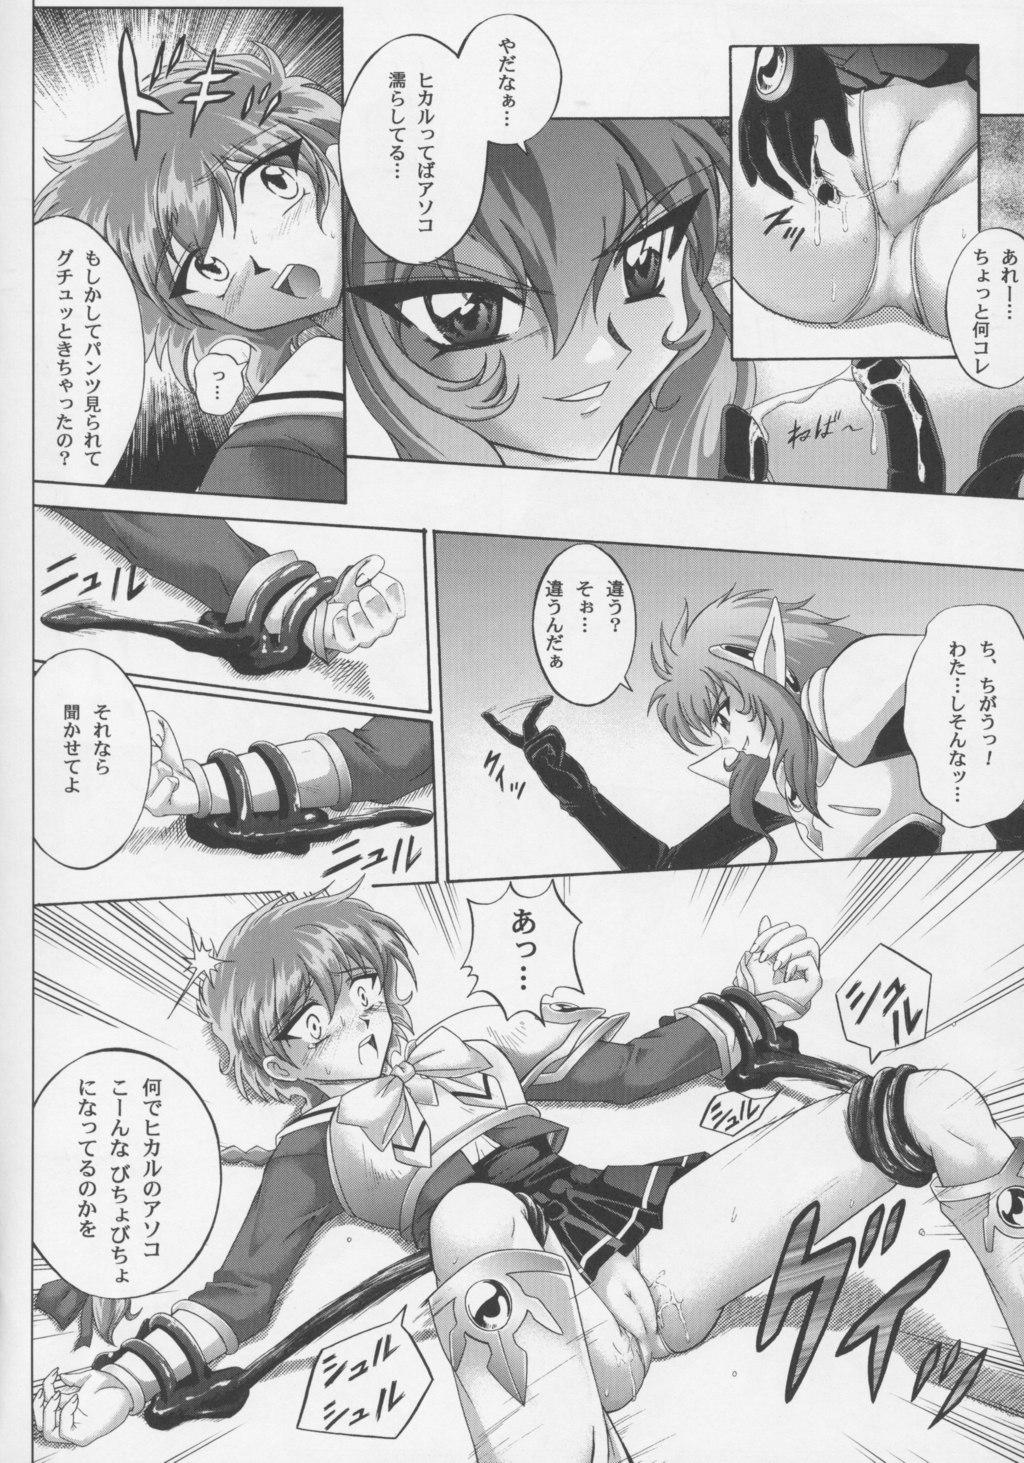 Bear Centris - Magic knight rayearth Monster Dick - Page 11